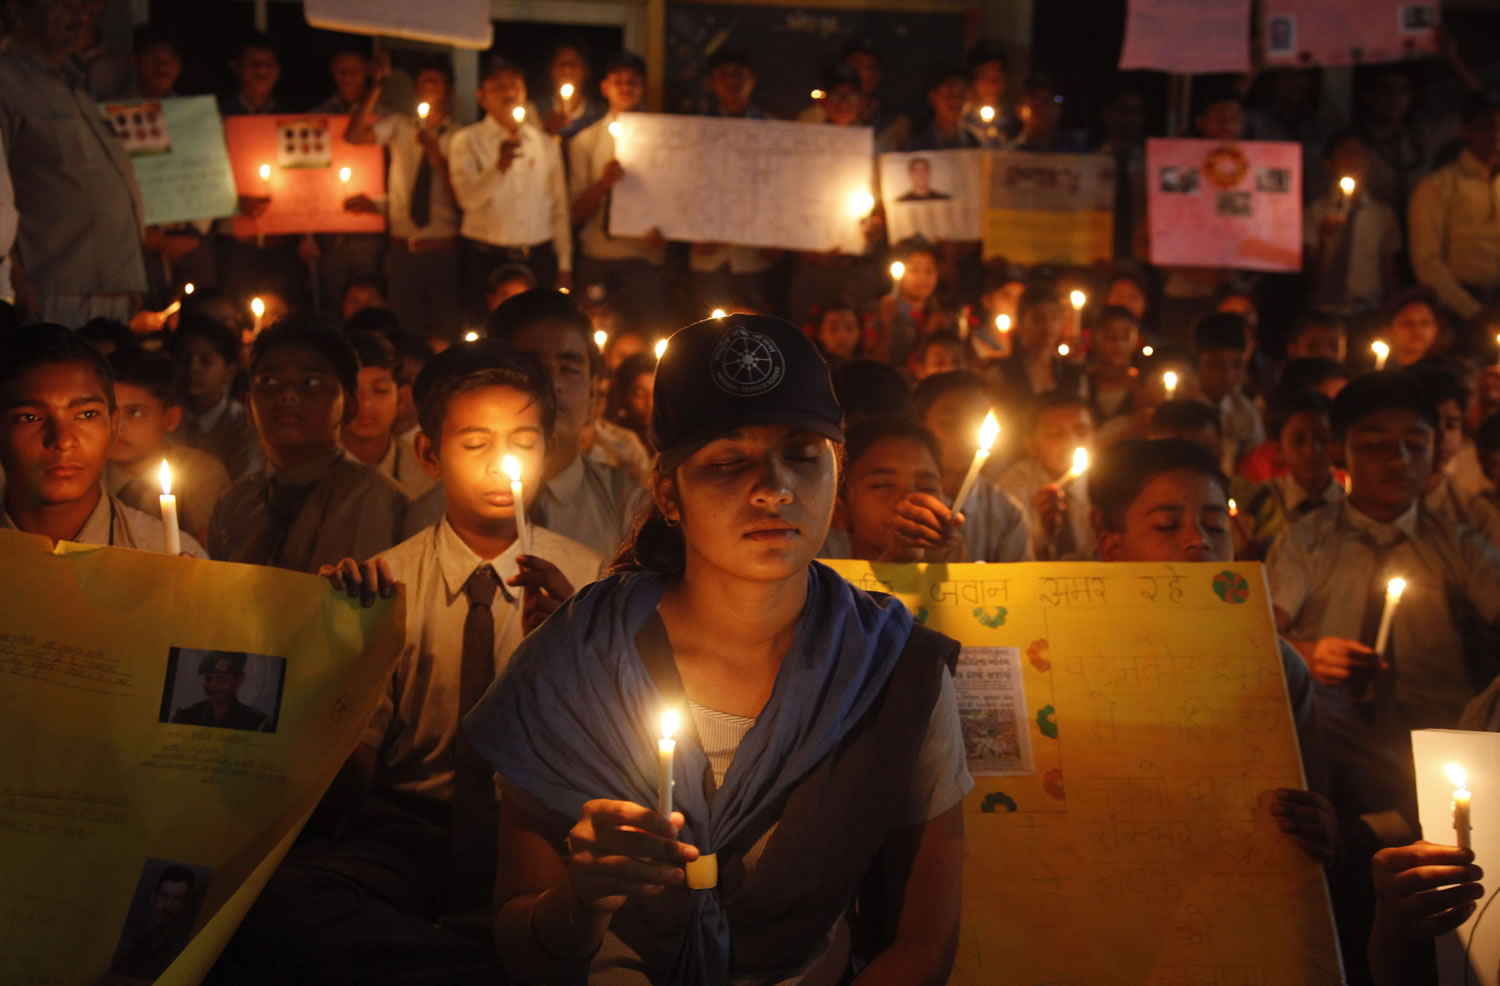 Indian students hold candles and placards as they pay tribute to the Indian soldiers killed in the Pathankot air base attack, at a school in Ahmadabad, India, Tuesday, Jan. 5, 2016.